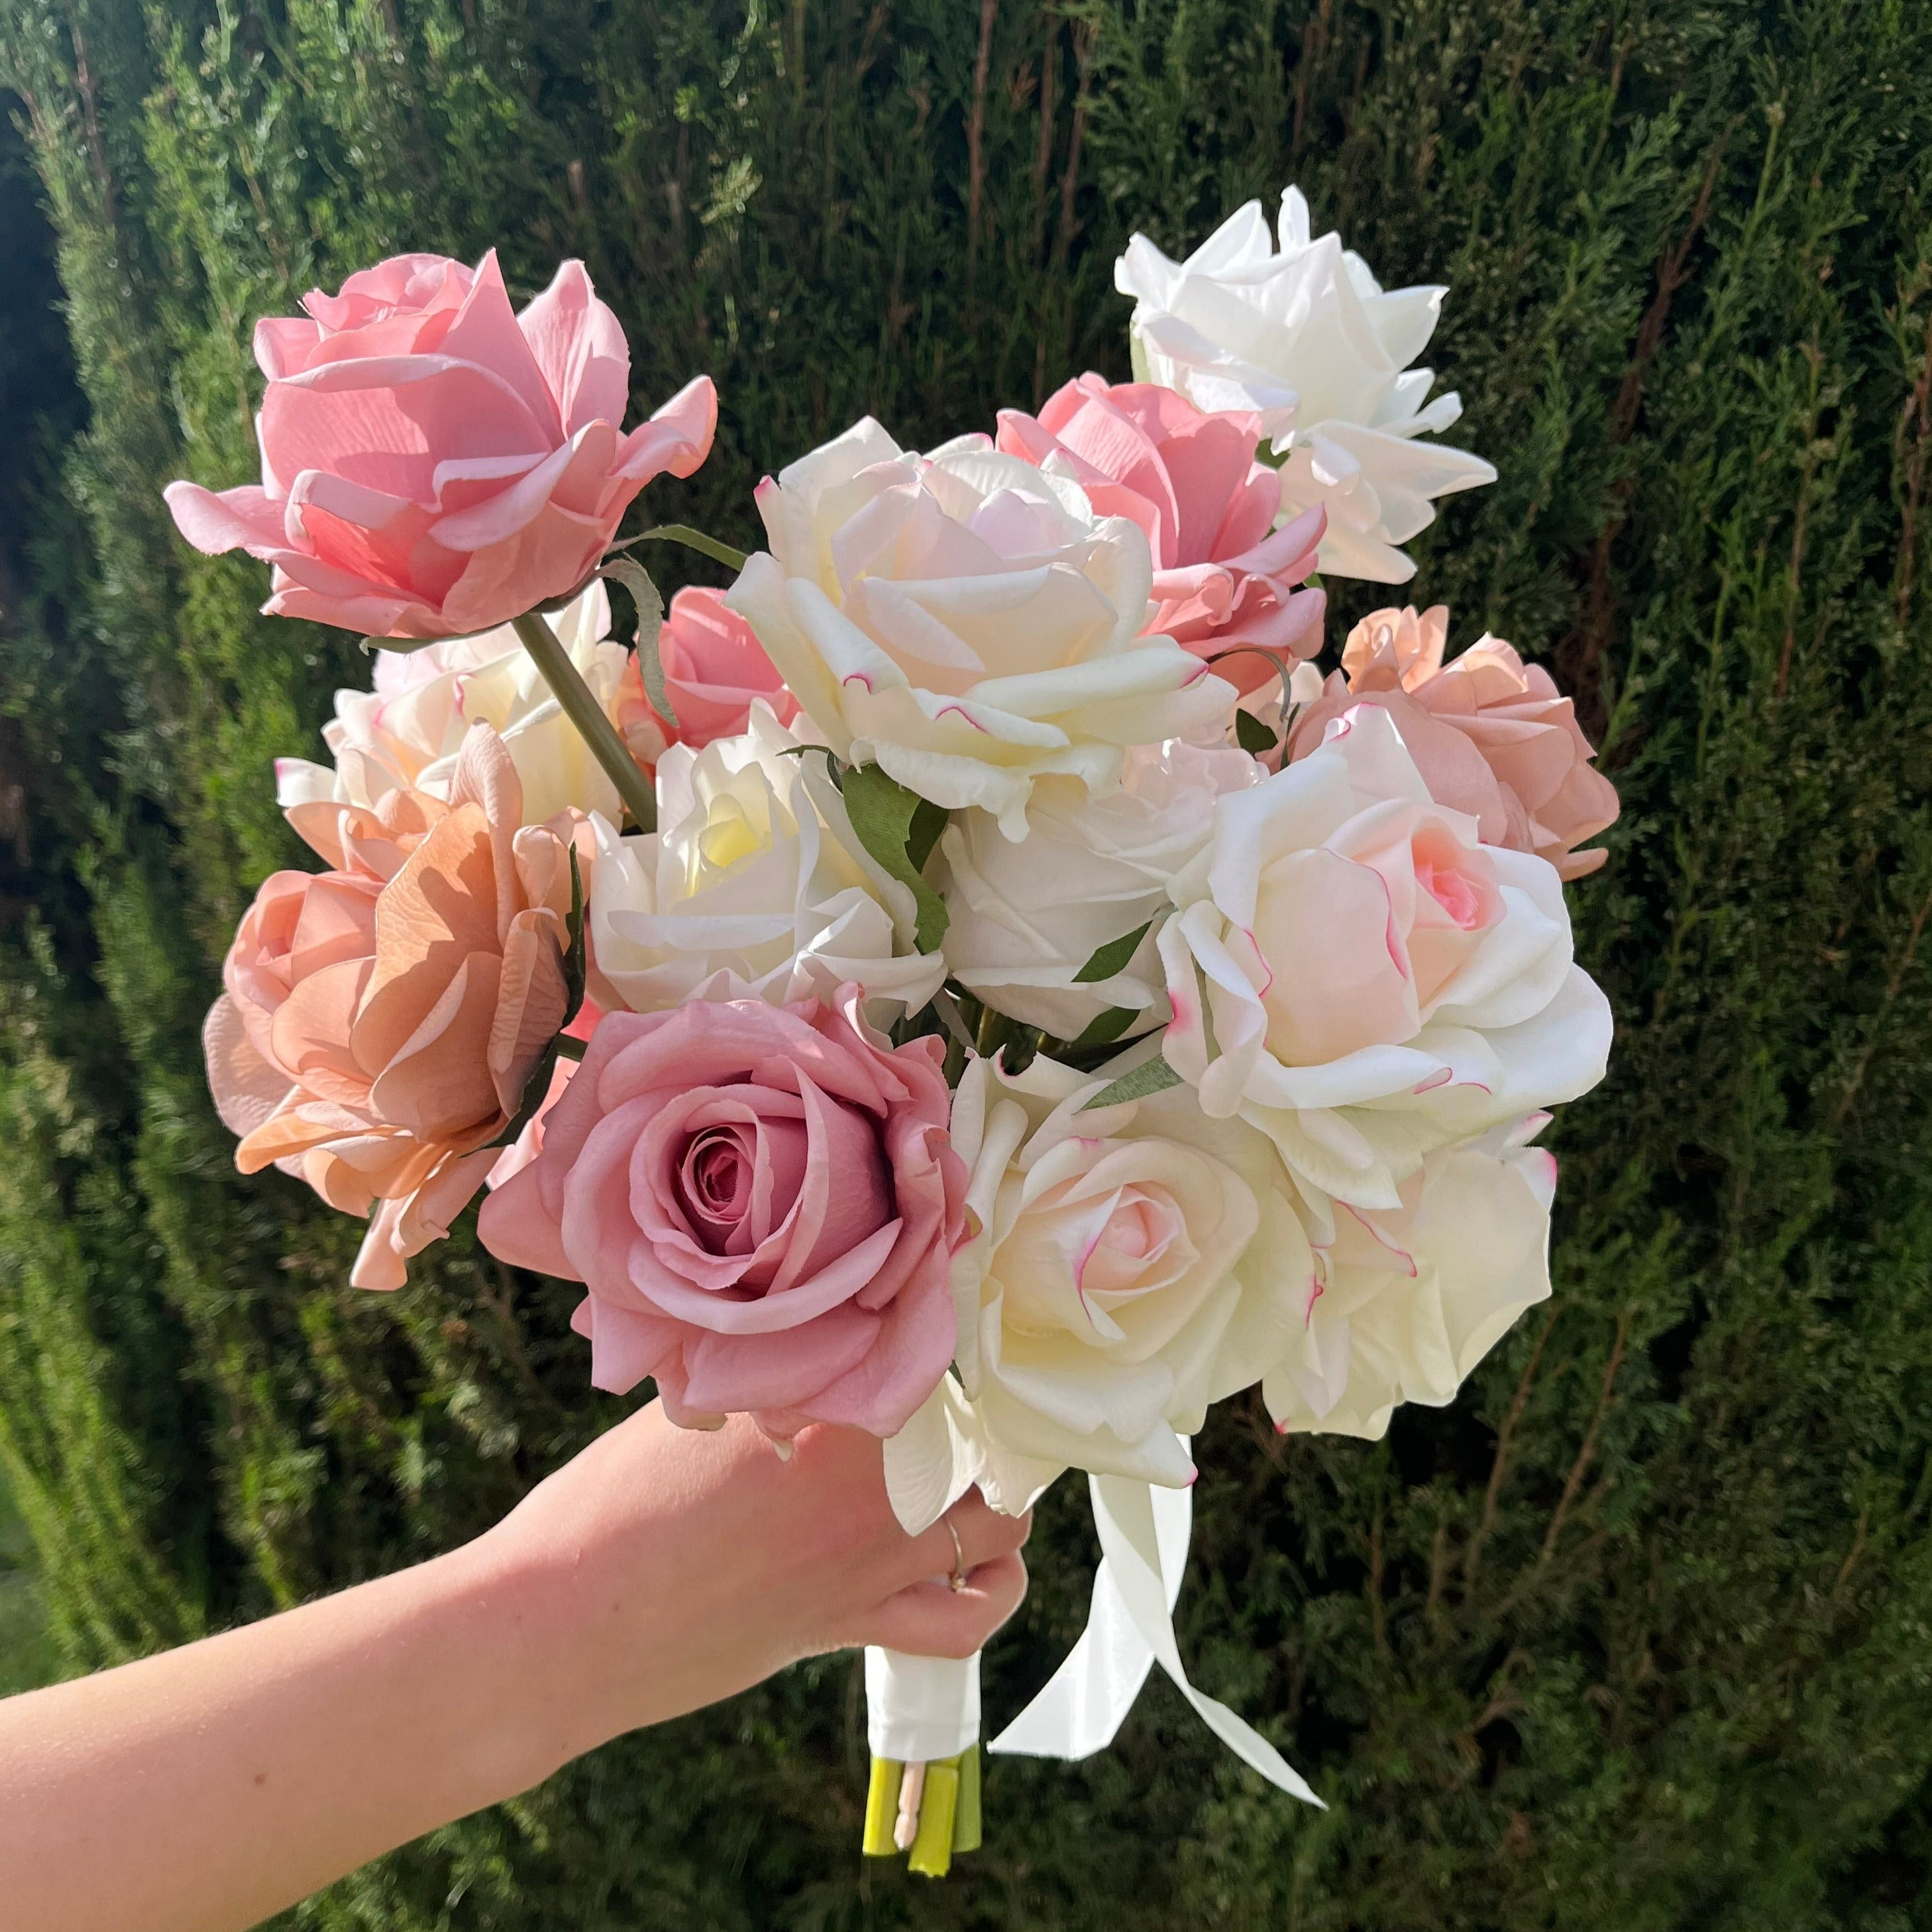 Vogue Pink - Abstract Bridal Bouquet